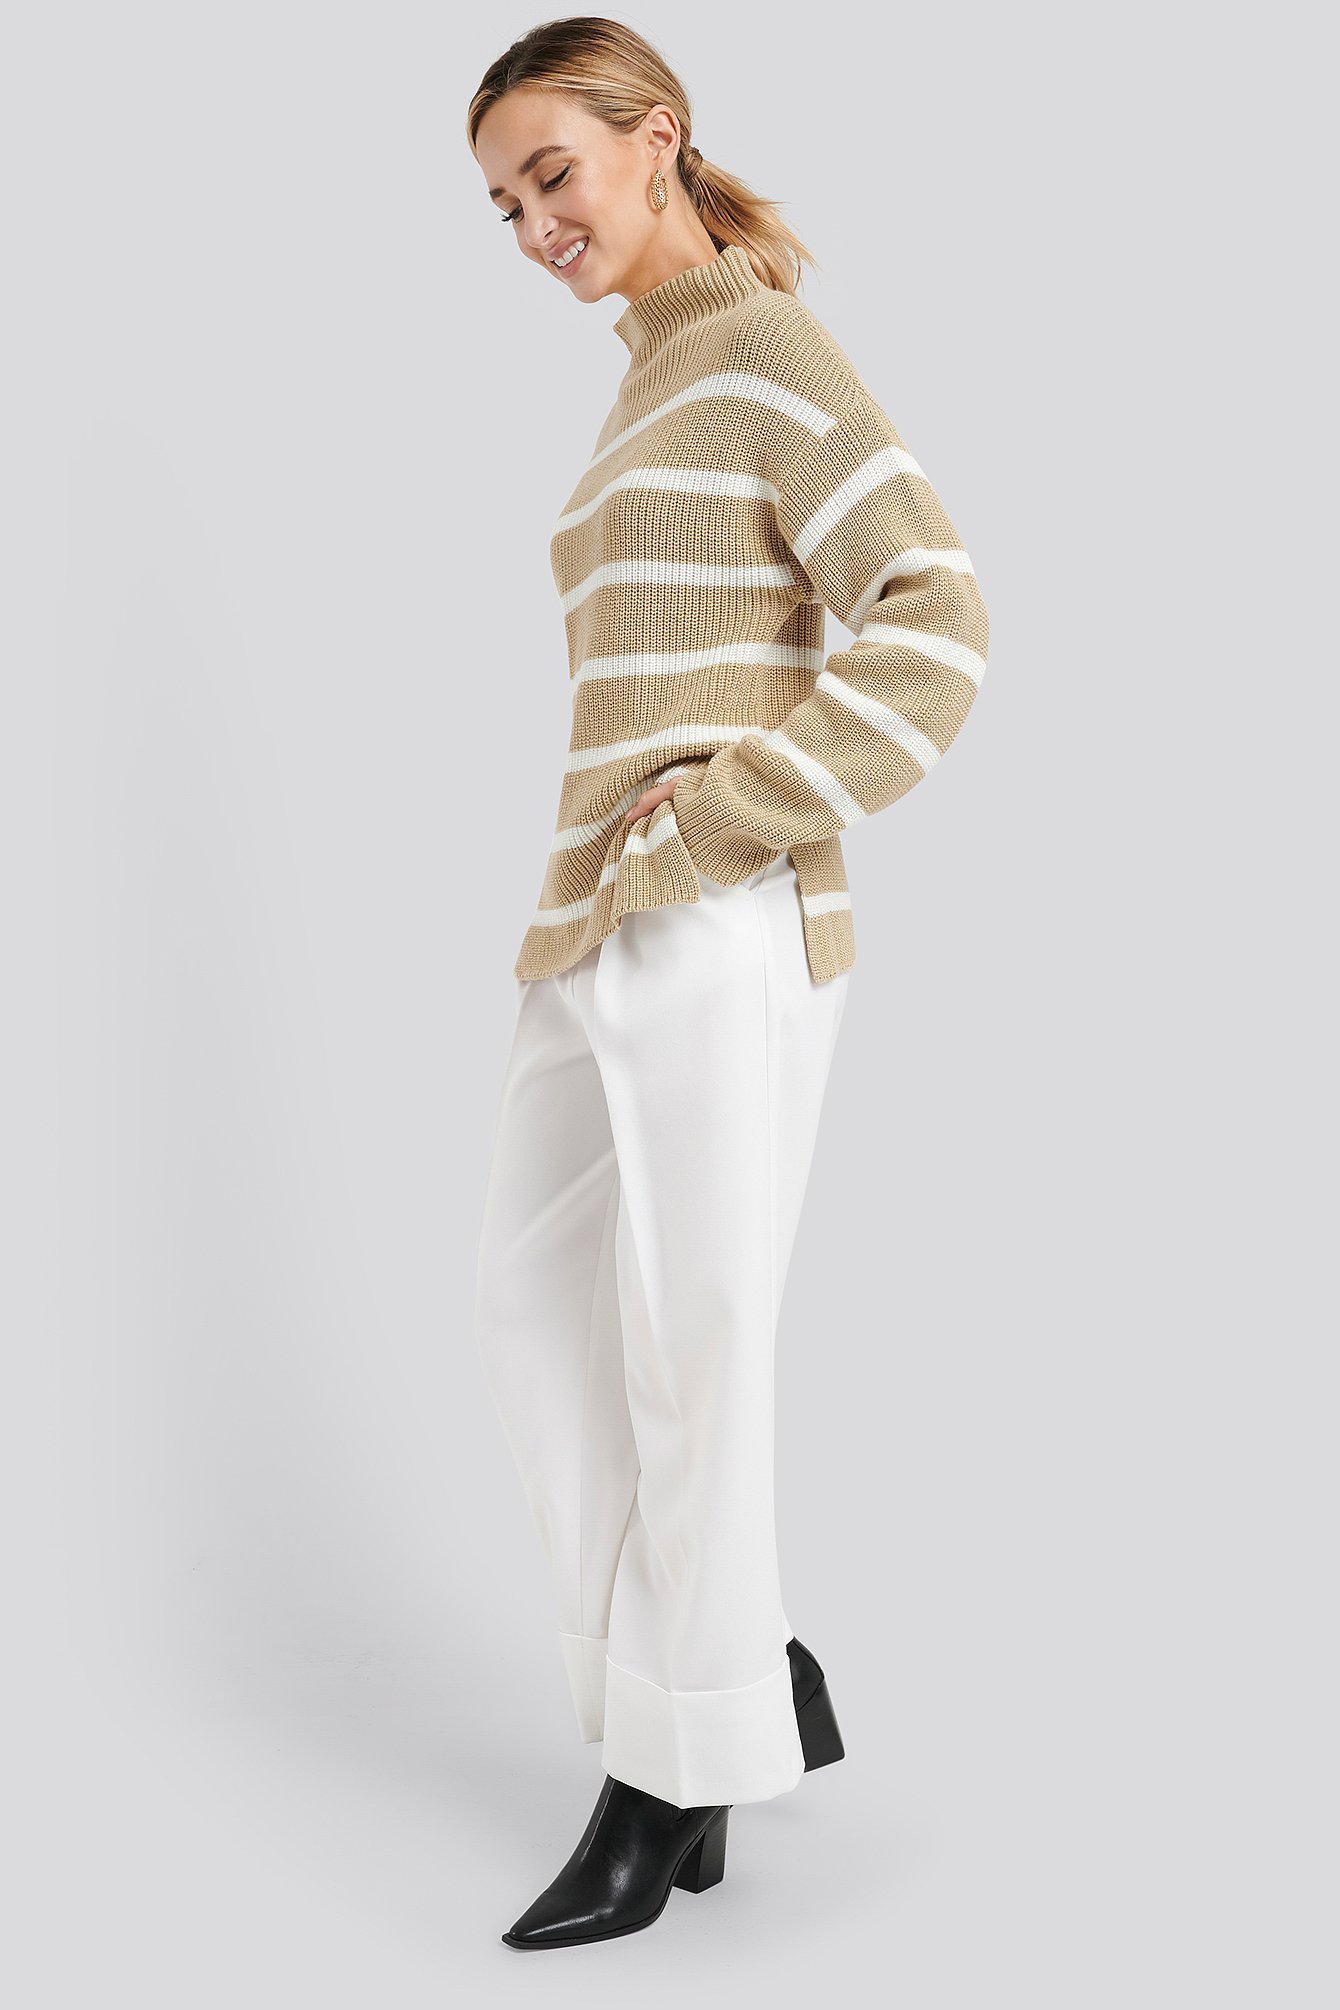 High Neck Striped Knitted Sweater Outfit.